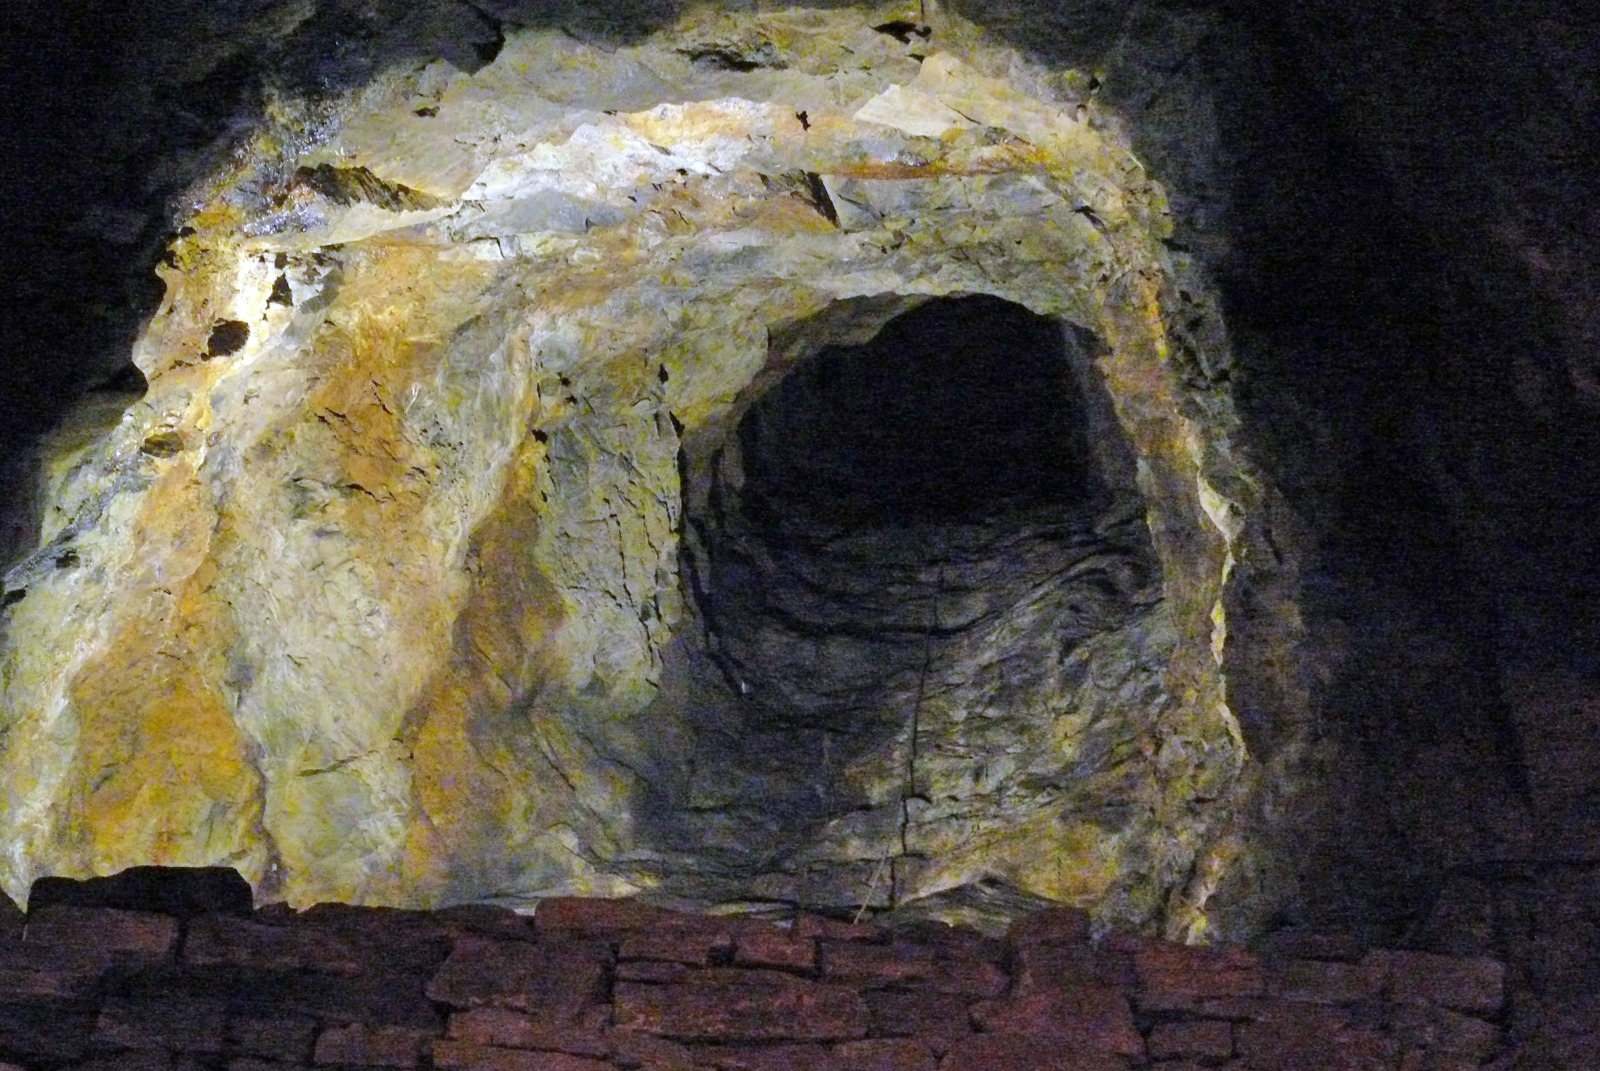 Gallery of an iron mine near Annaberg (Ore Mountains) © Ad Meskens - licence [CC BY-SA 3.0] from Wikimedia Commons